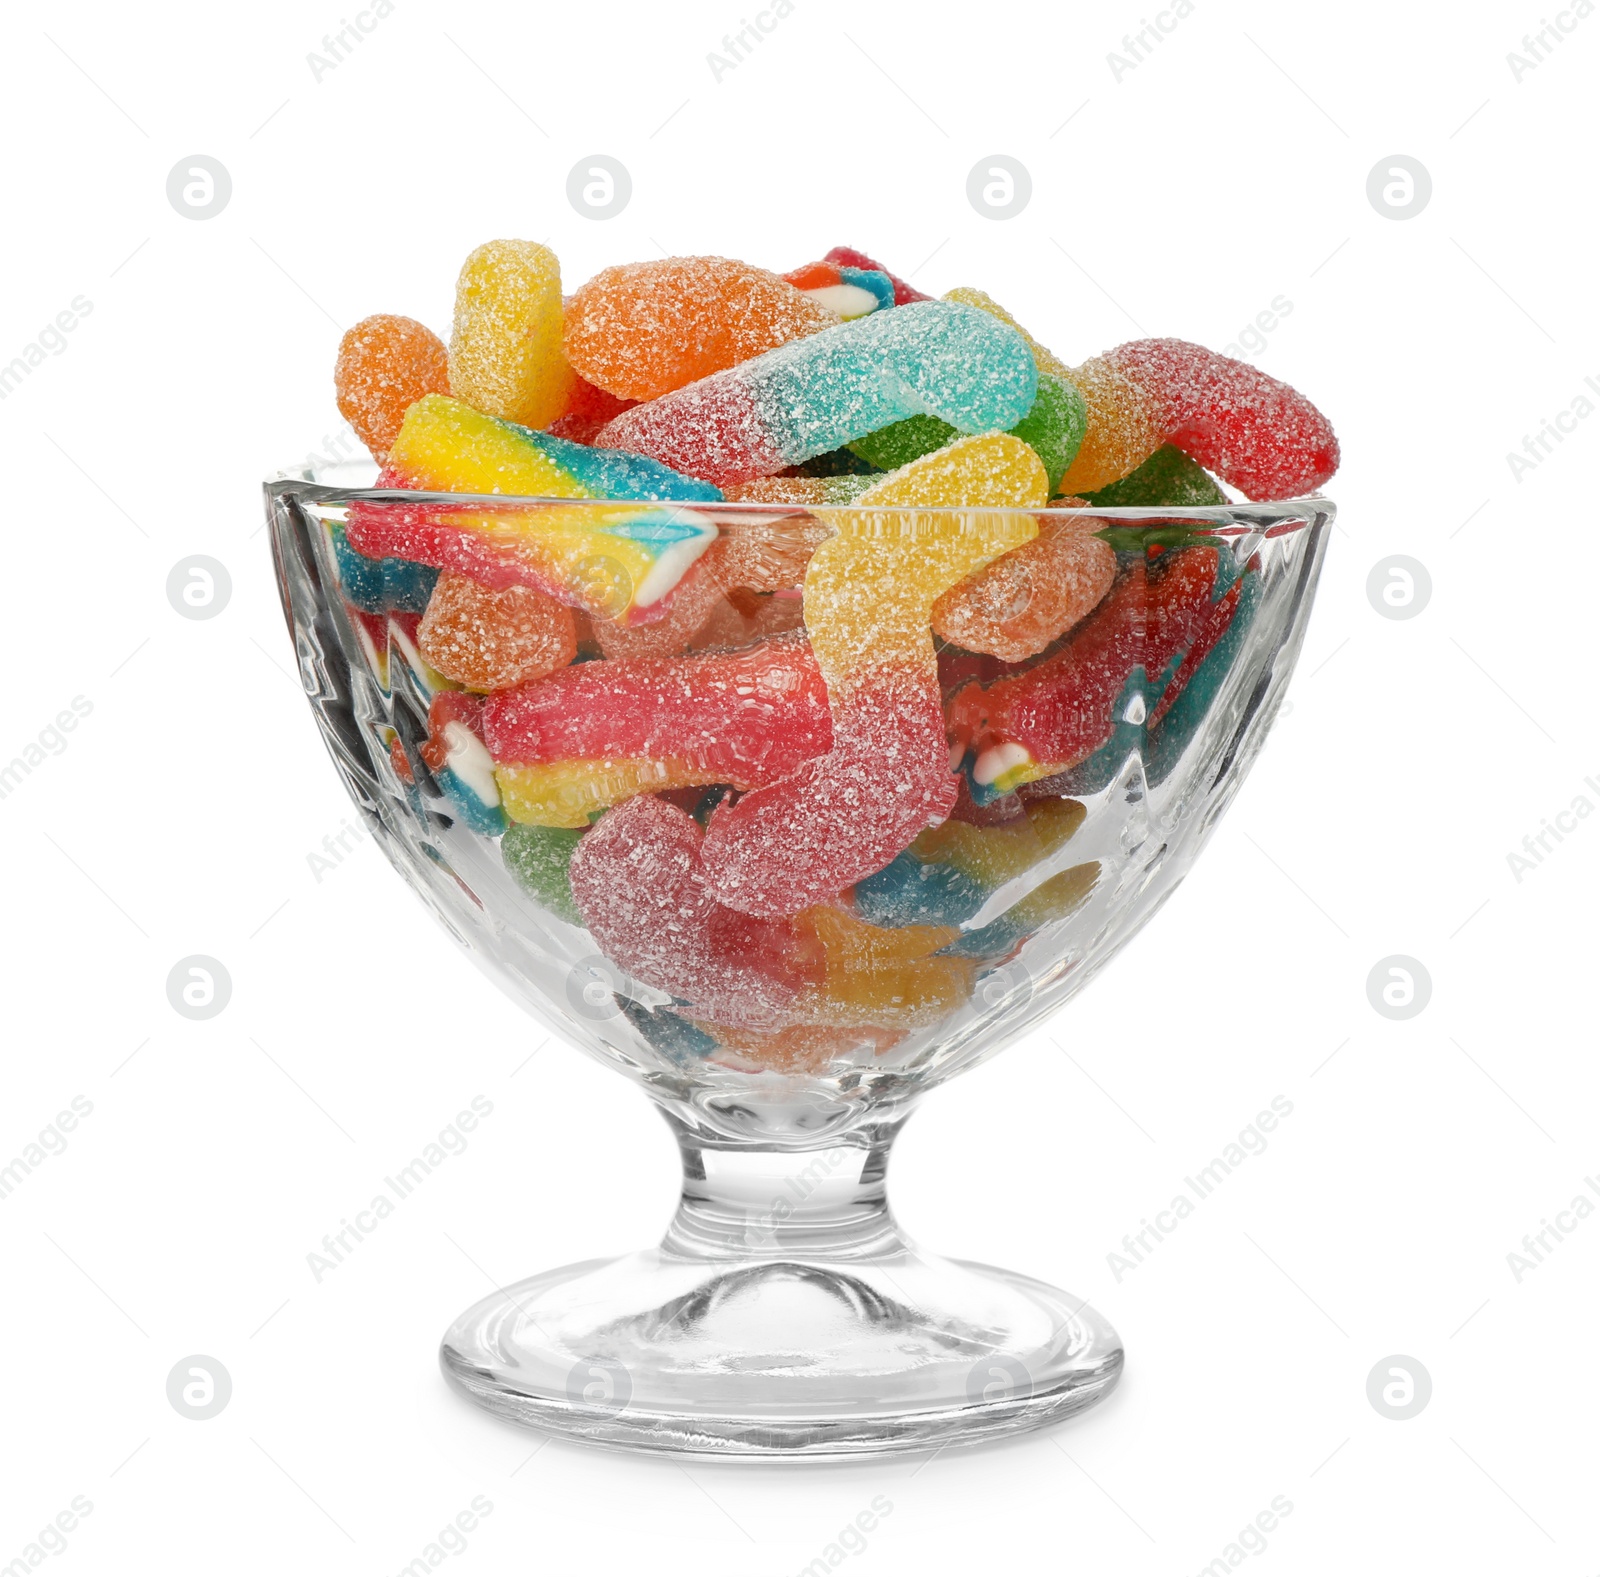 Photo of Many jelly candies in glass dessert bowl isolated on white